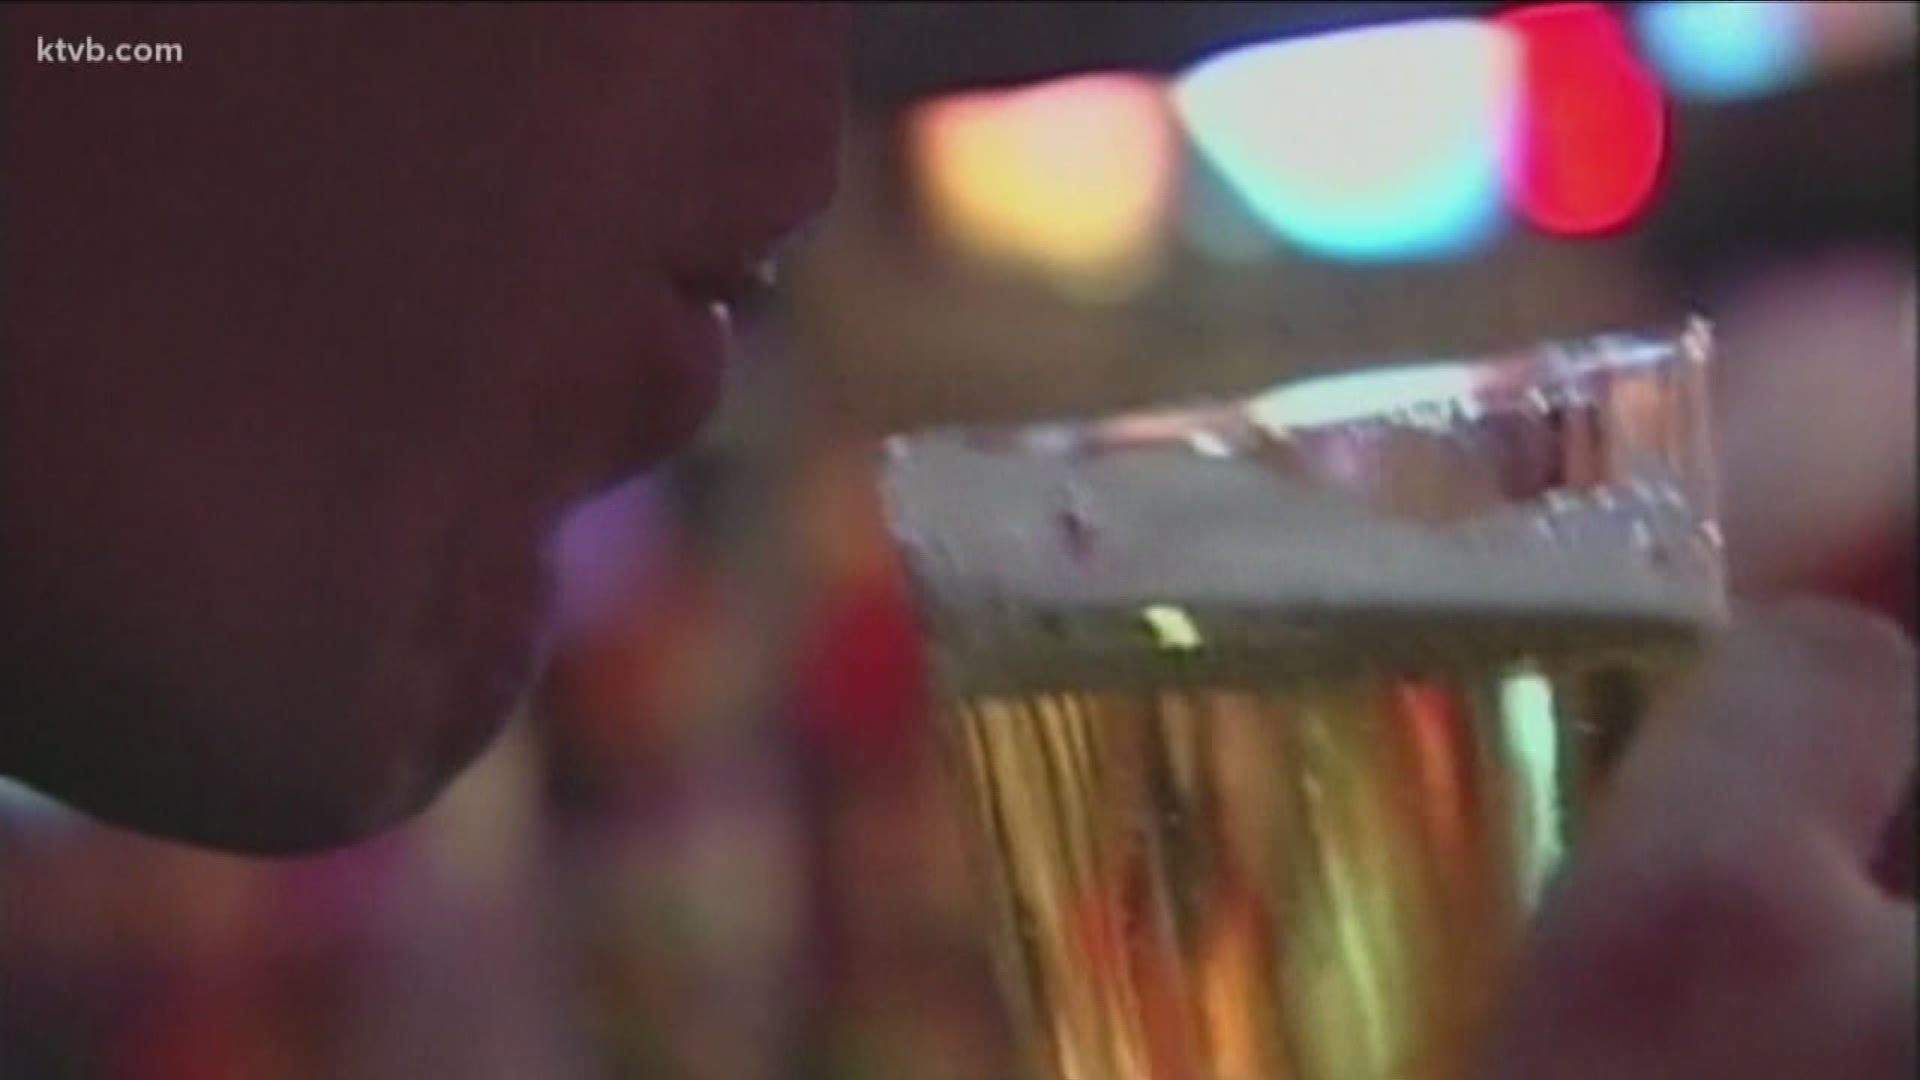 After a man admitted to heavily drinking at several Blaine County bars and causing a crash that killed three little girls, KTVB look into Idaho's over-serving laws. "It's life and death, I mean if your staff is not trained and just wheeling alcohol freely, someone gets hurt, like we have seen this last week, or killed," Ted Challenger, owner of Amsterdam Lounge and several other downtown Boise bars, explained.